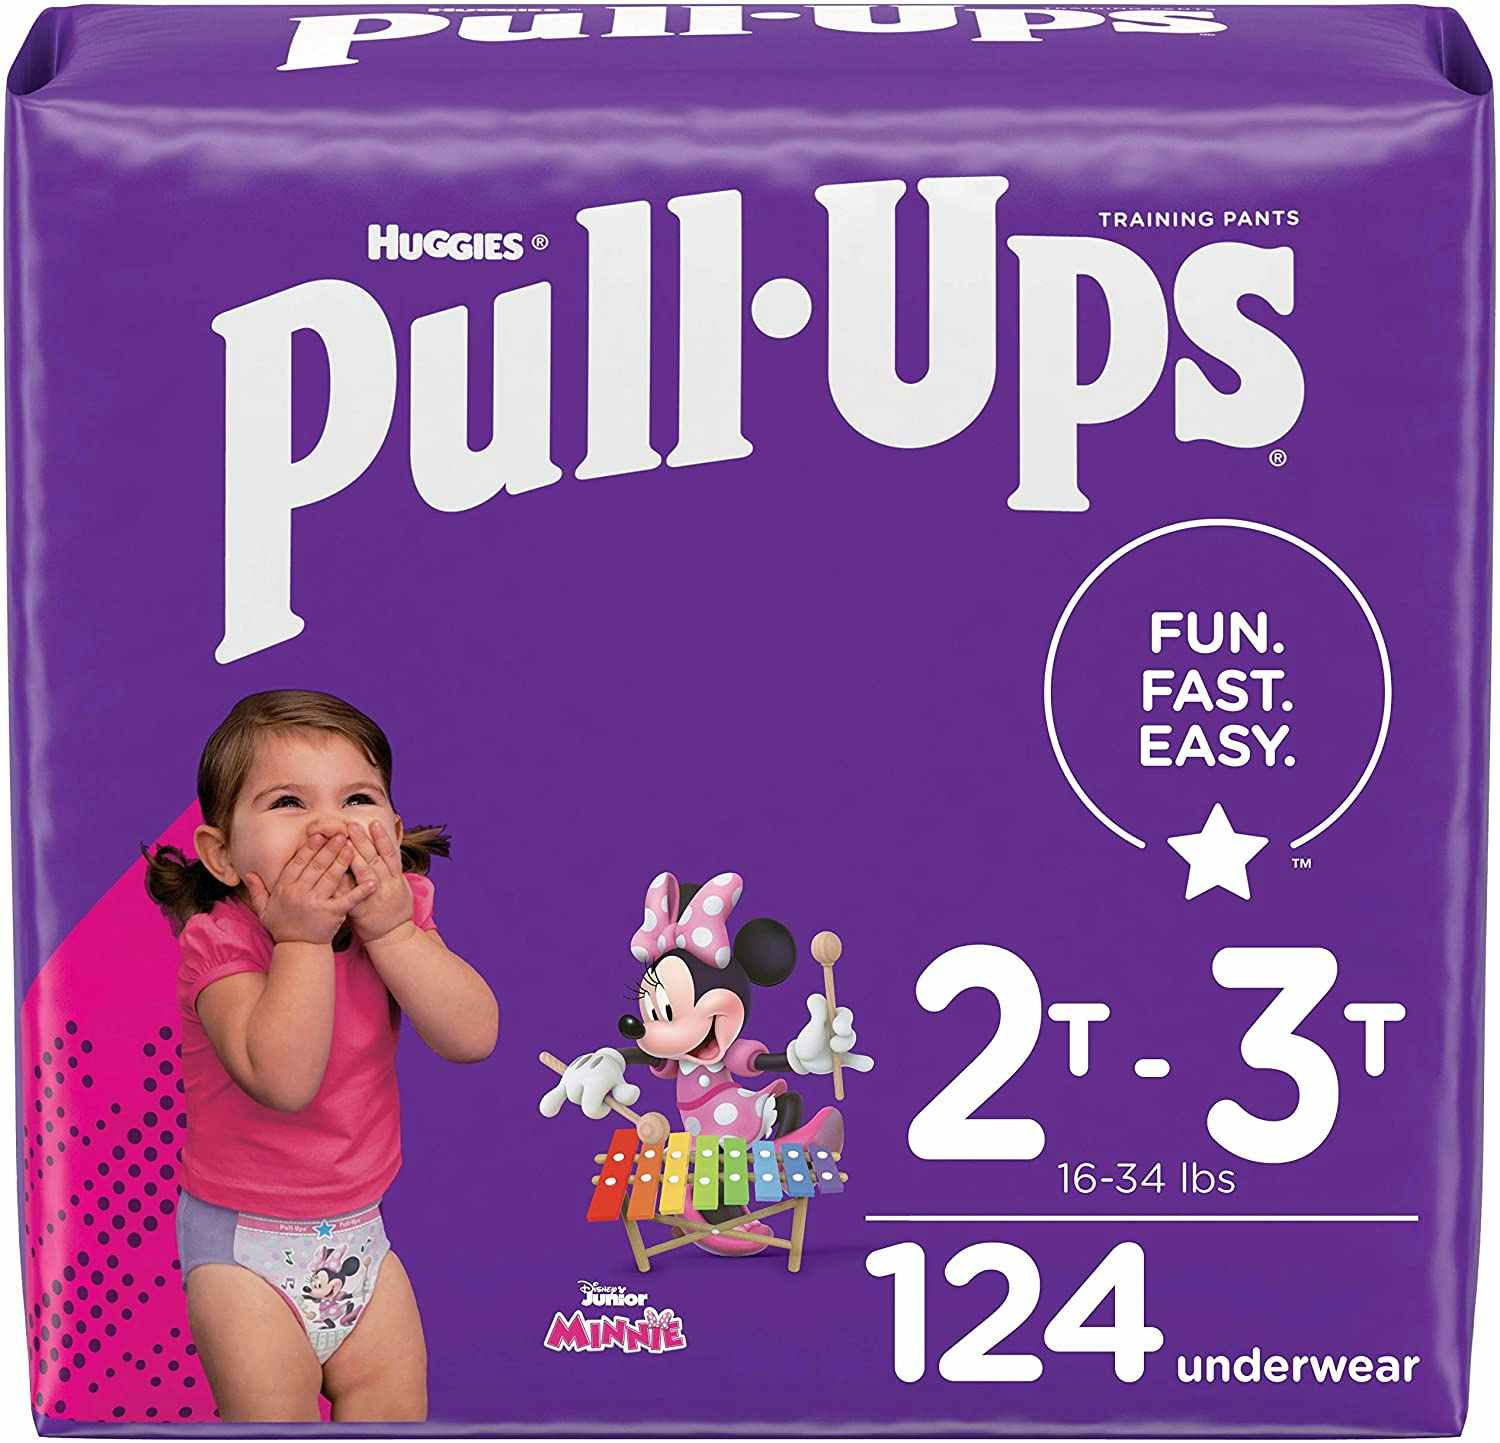 A pack of Huggies Pull-Ups in size four.